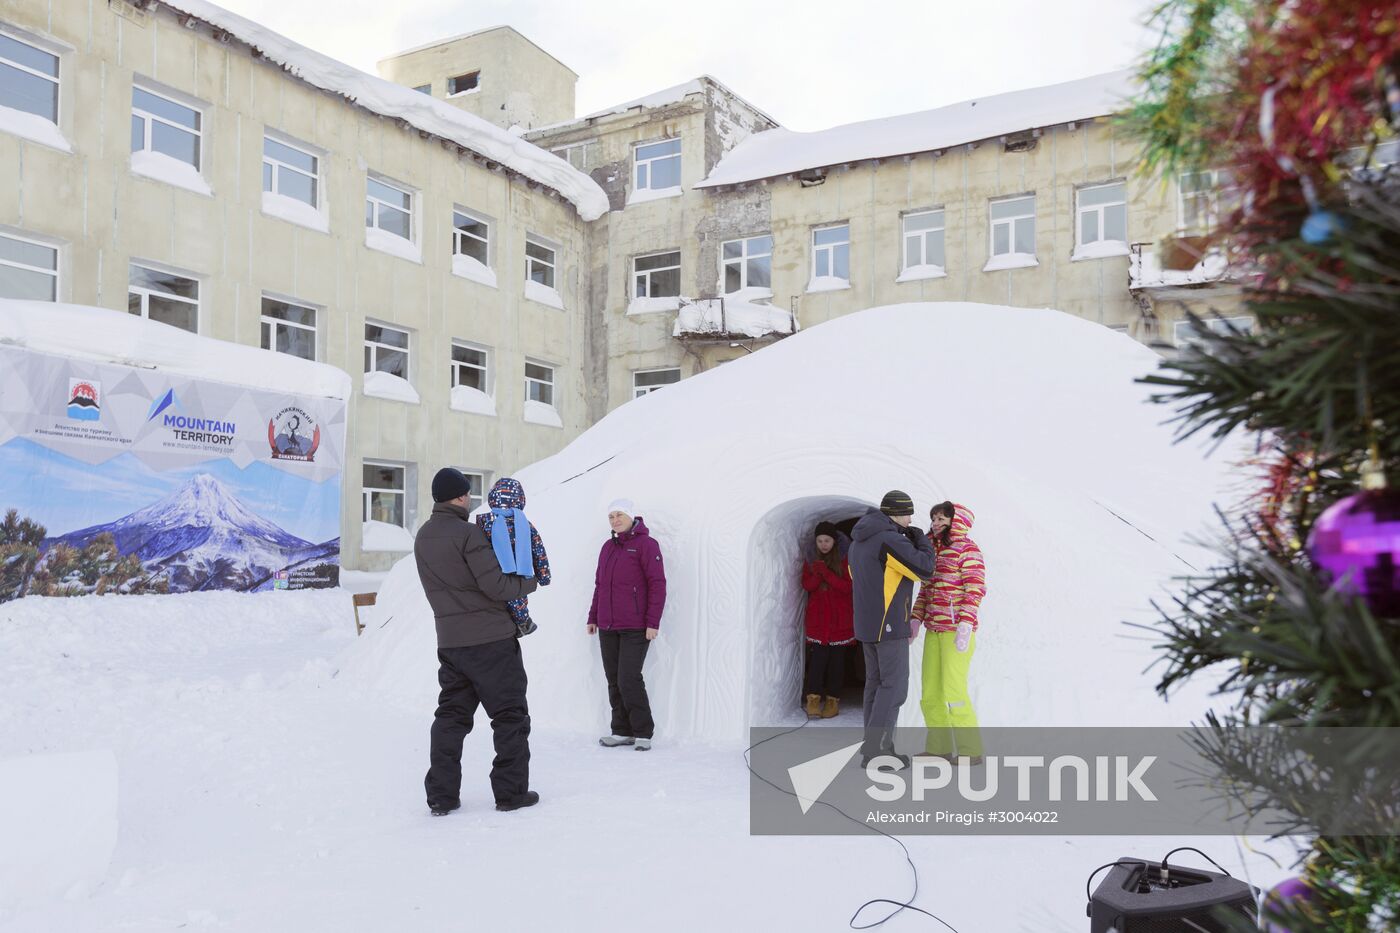 Russia' only igloo hotel unveiled in Kamchatka